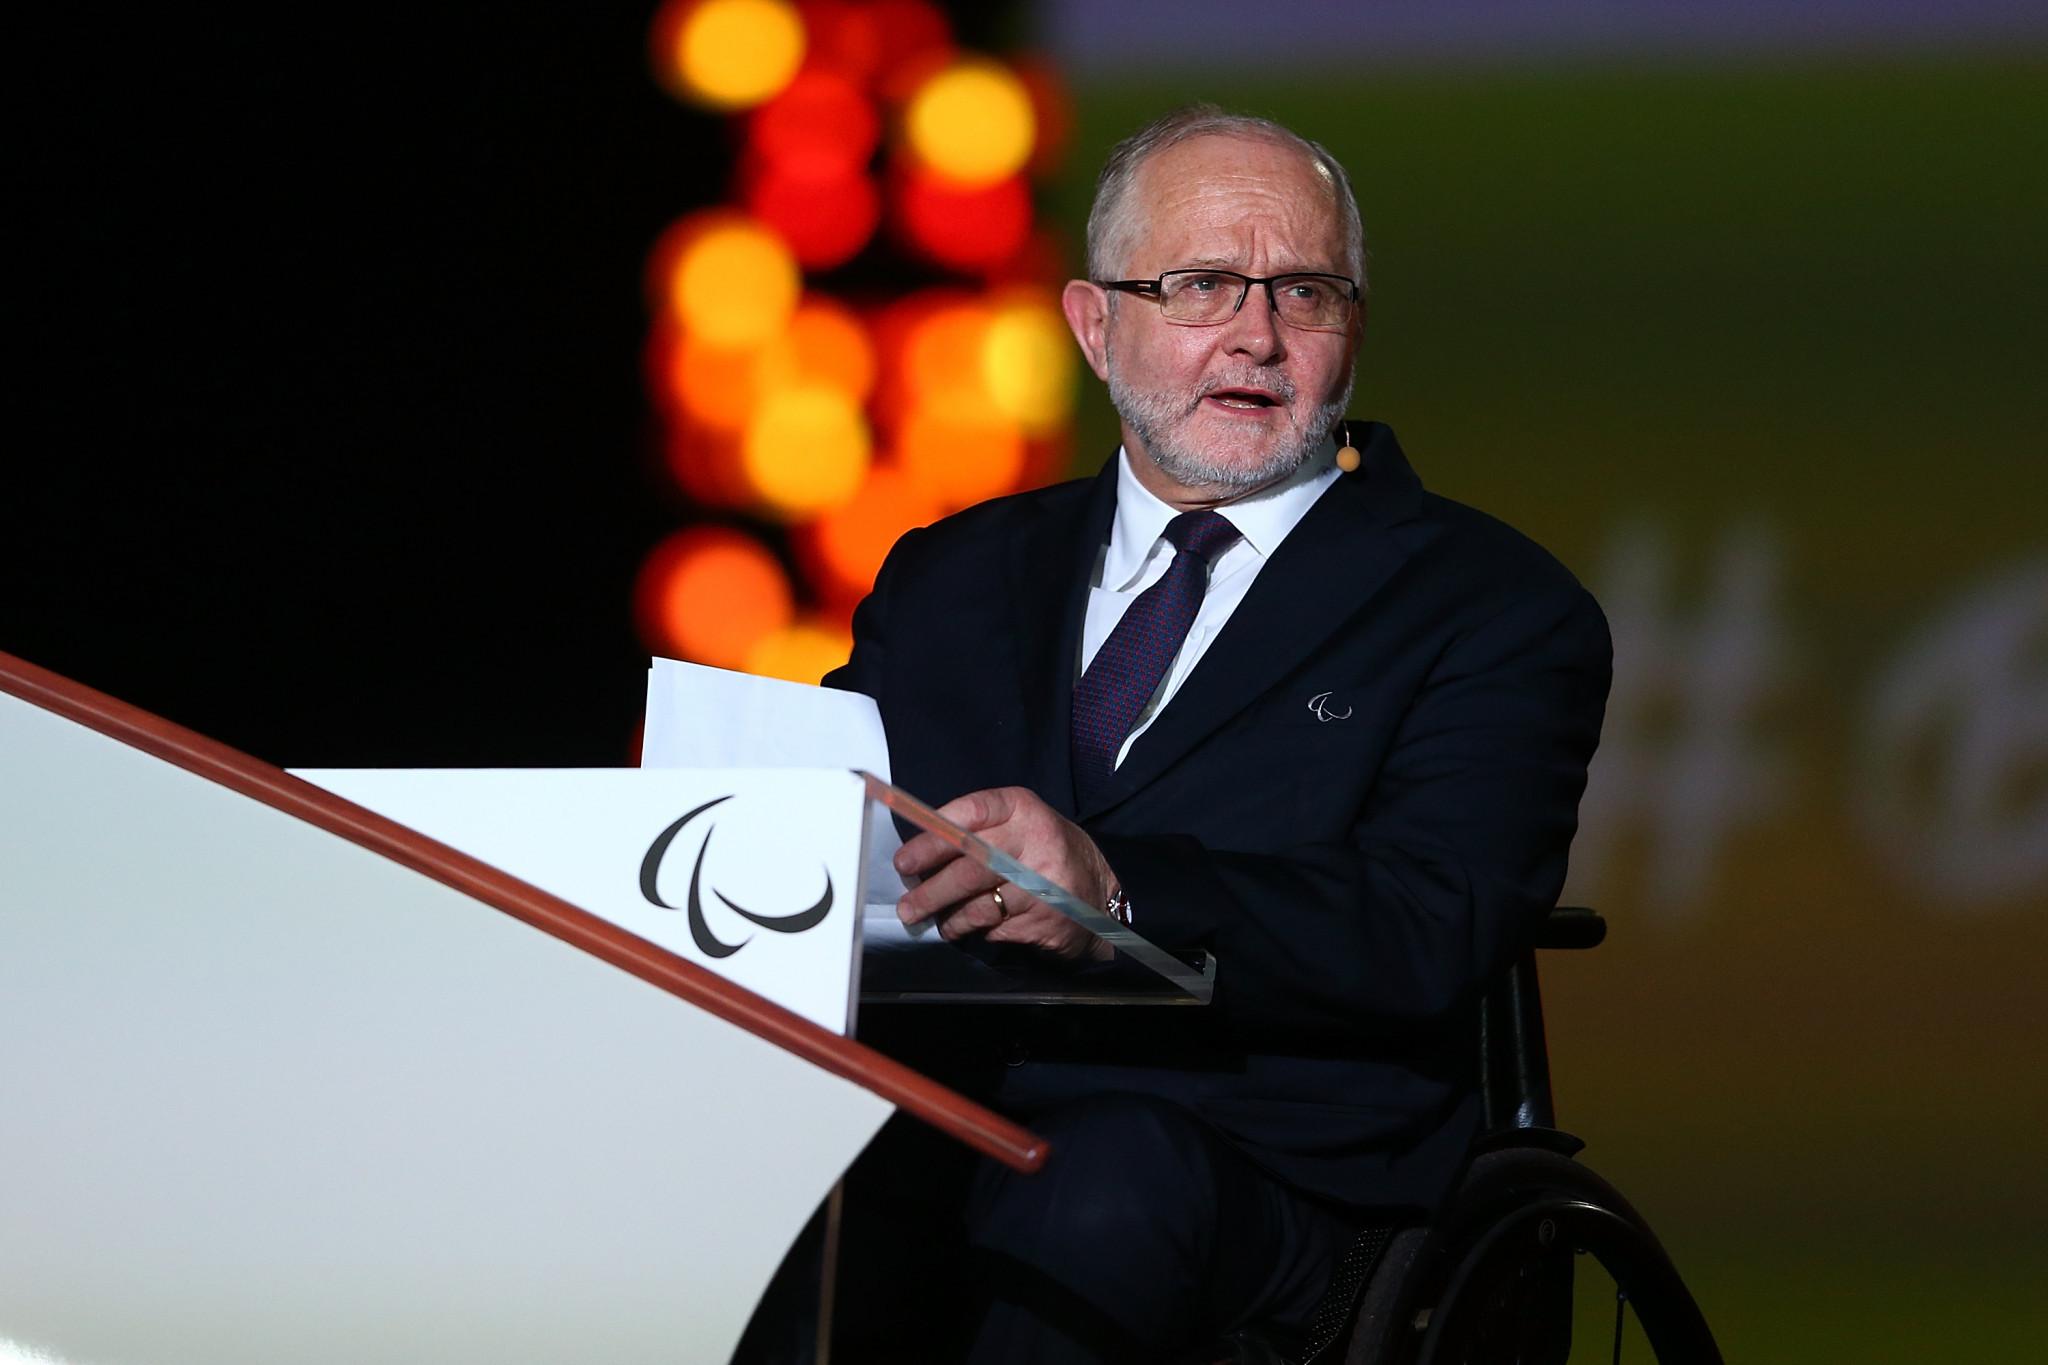 The successor to IPC President Sir Philip Craven, who has led the organisation since 2001, is due to be elected during the General Assembly ©Getty Images